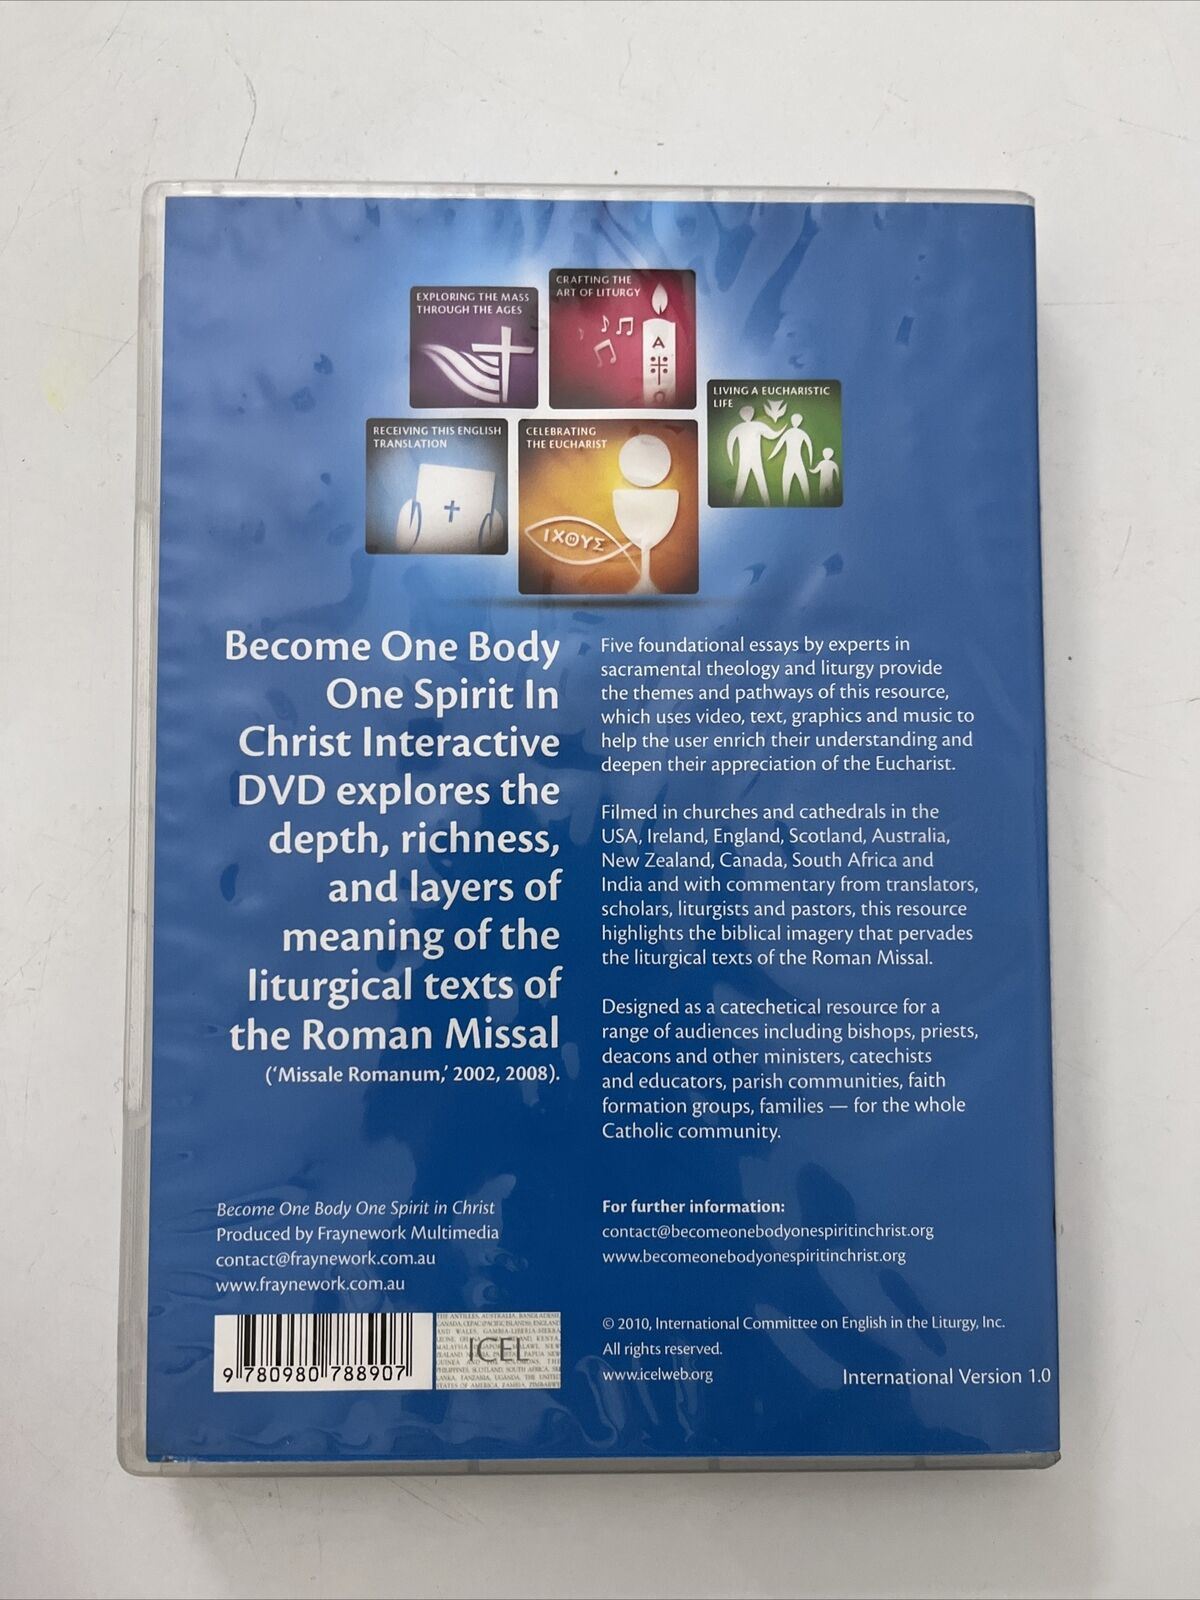 Become One Body One Spirit in Christ - DVD Windows